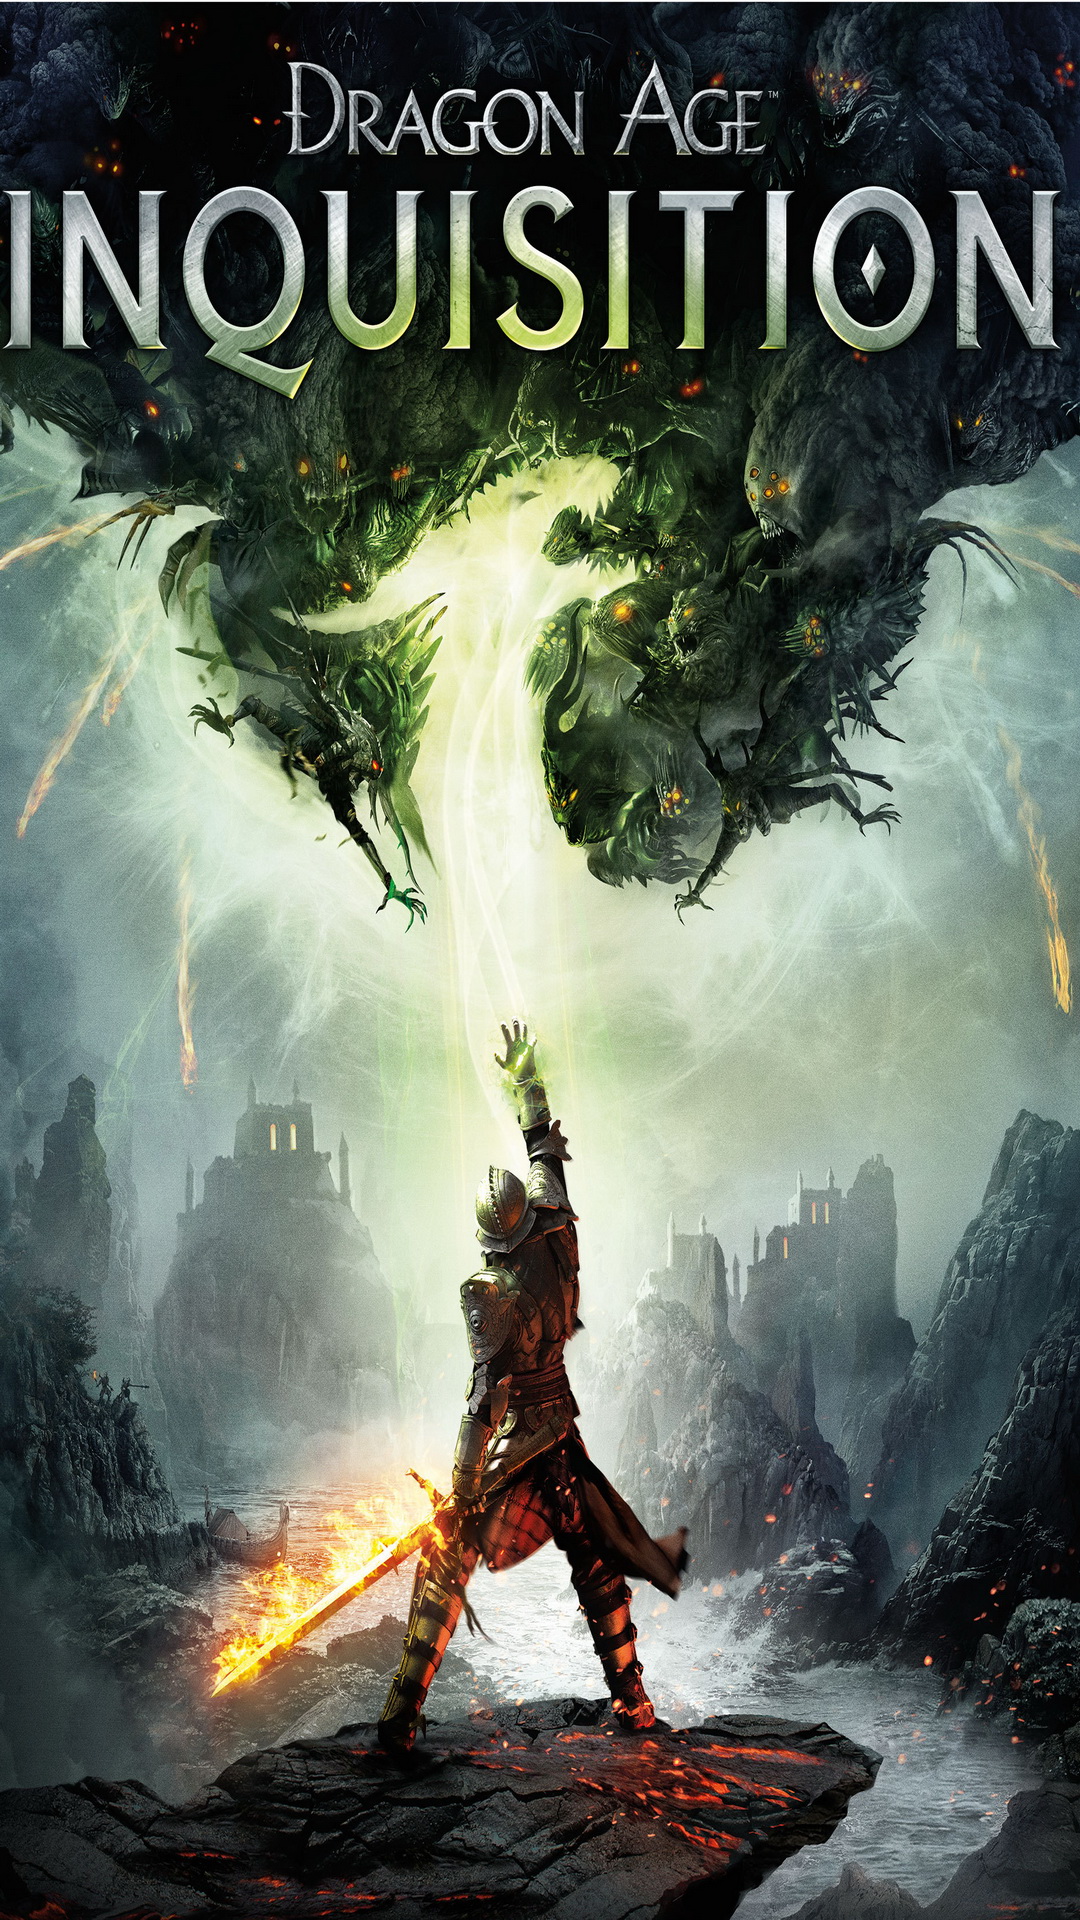 Dragon age inquisition iPhone6 plus Wallpaper for iPhone 4S and iPhone